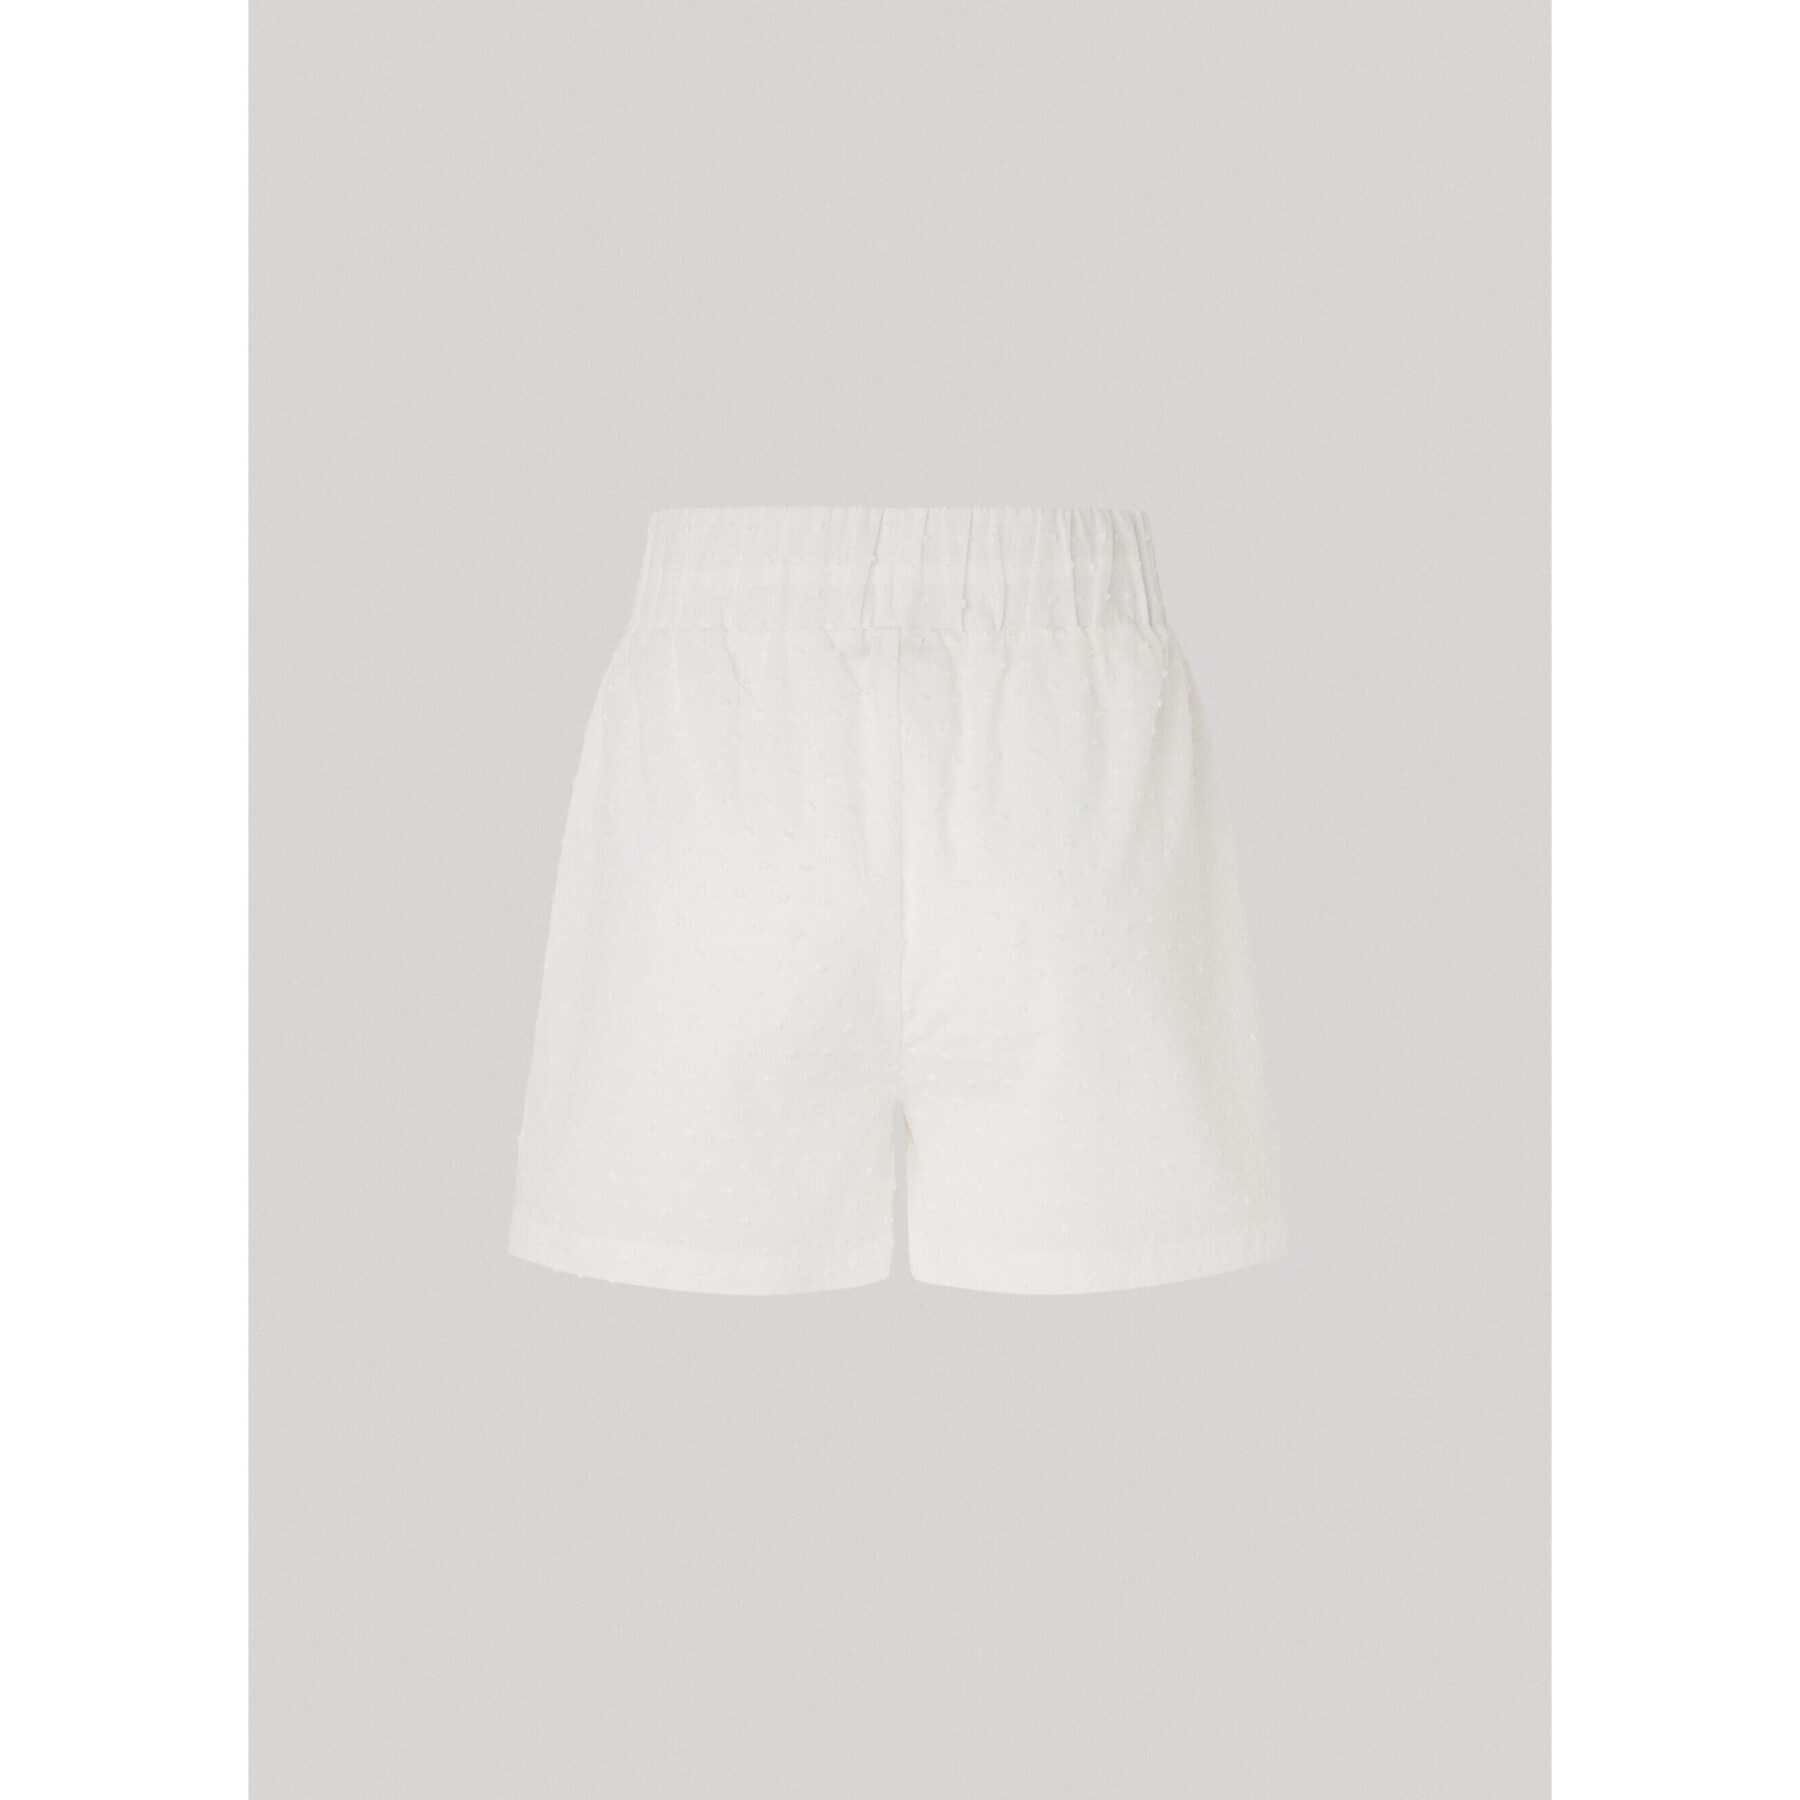 Damesshort Pepe Jeans Broderie